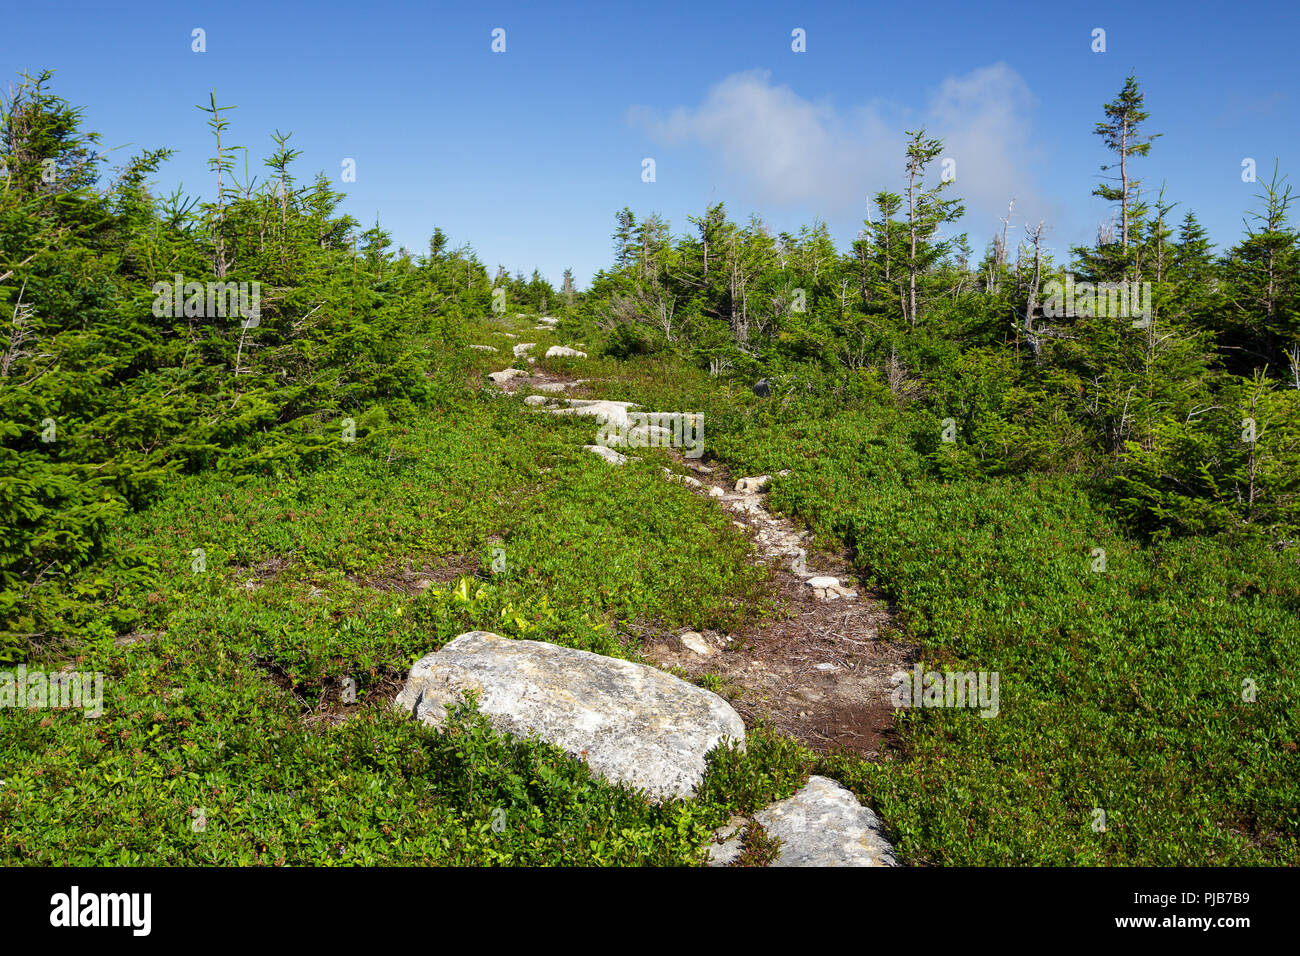 The Mittersill-Cannon Trail on Mittersill Mountain in the White Mountains of New Hampshire during the summer season. Stock Photo